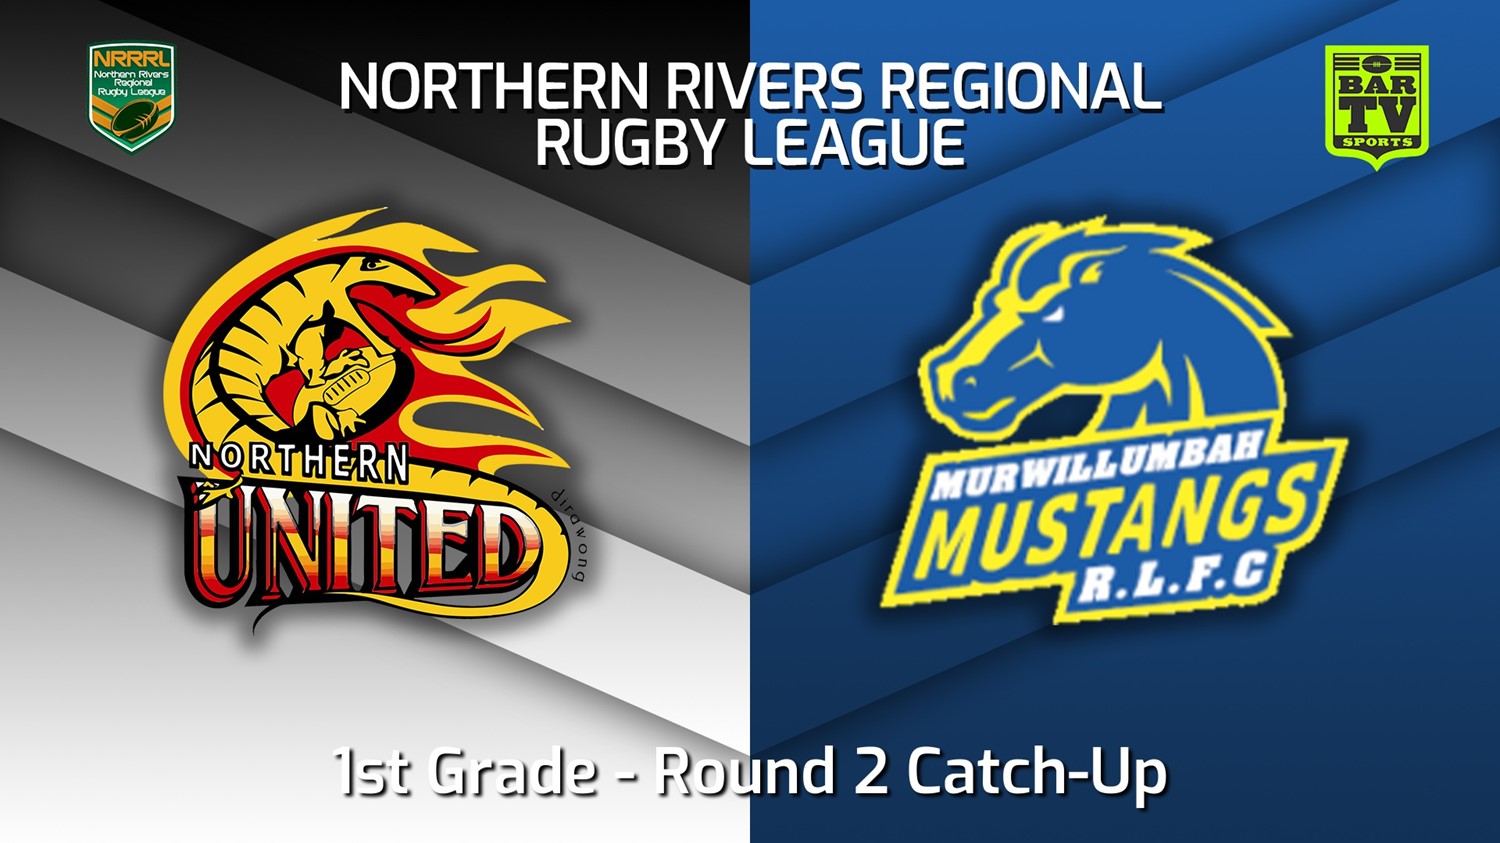 220609-Northern Rivers Round 2 Catch-Up - 1st Grade - Northern United v Murwillumbah Mustangs Slate Image